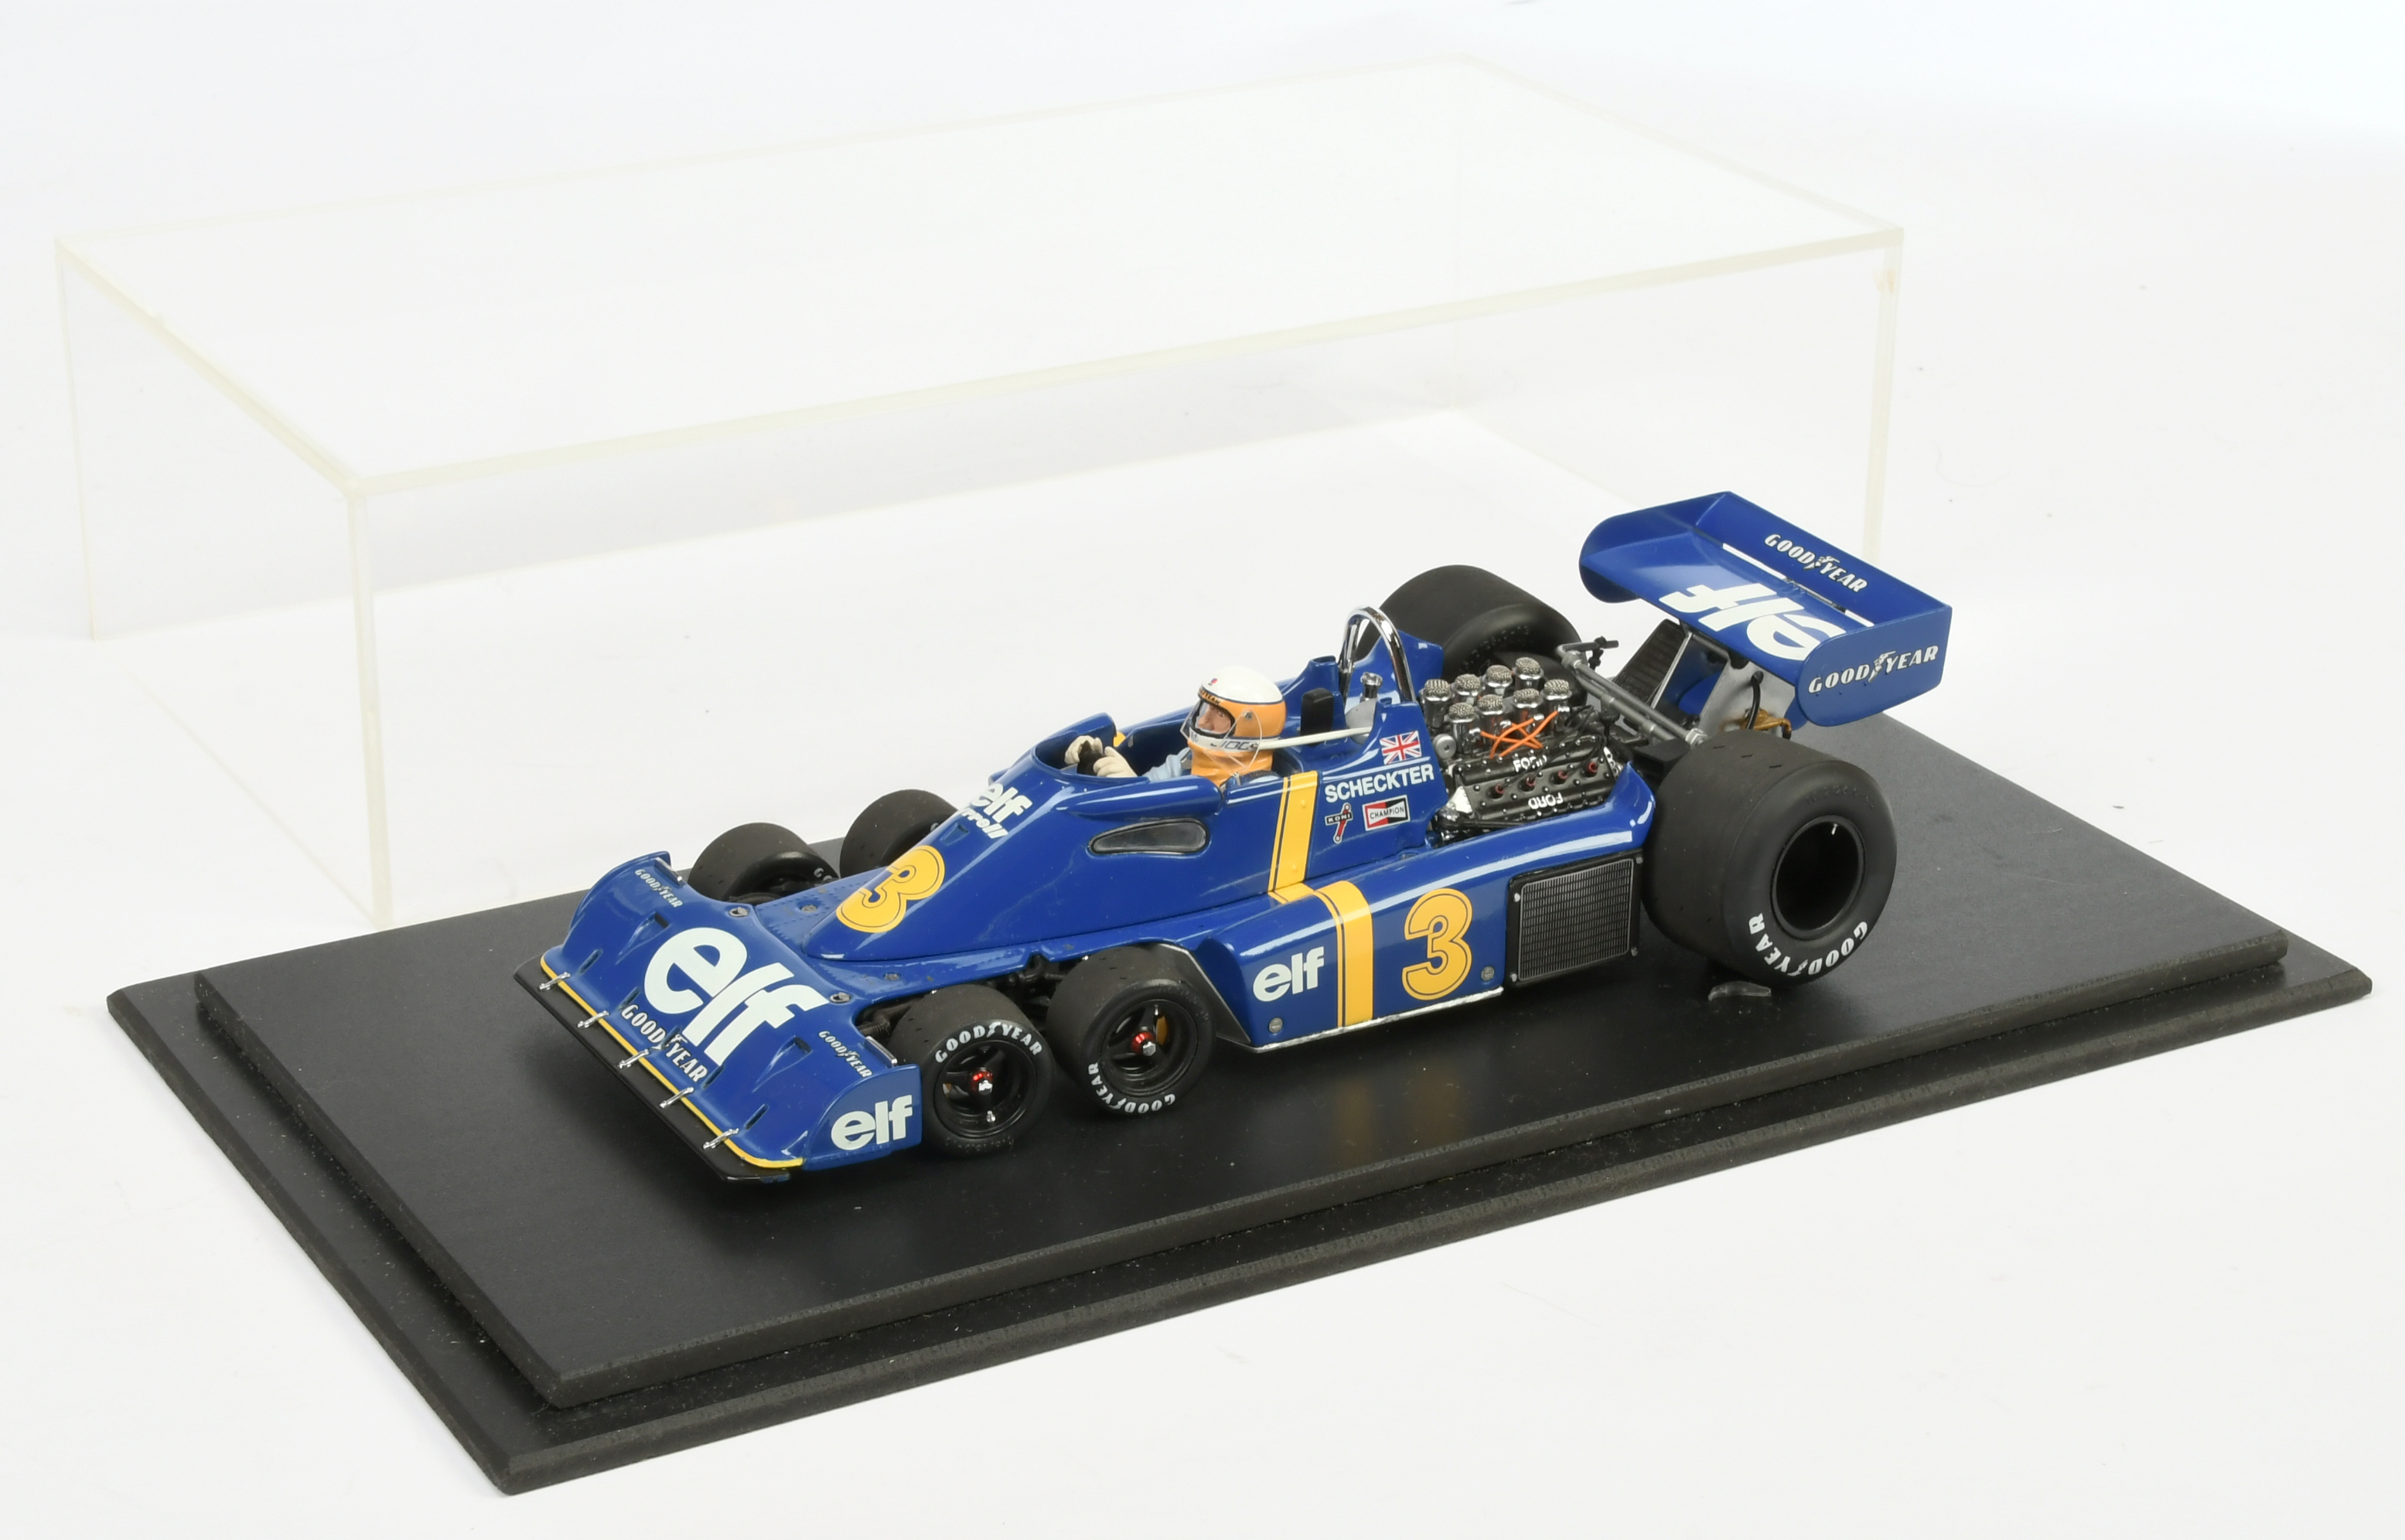 Exoto Tyrrell Ford 1/18 scale model racing car, Scheckter, racing number 3